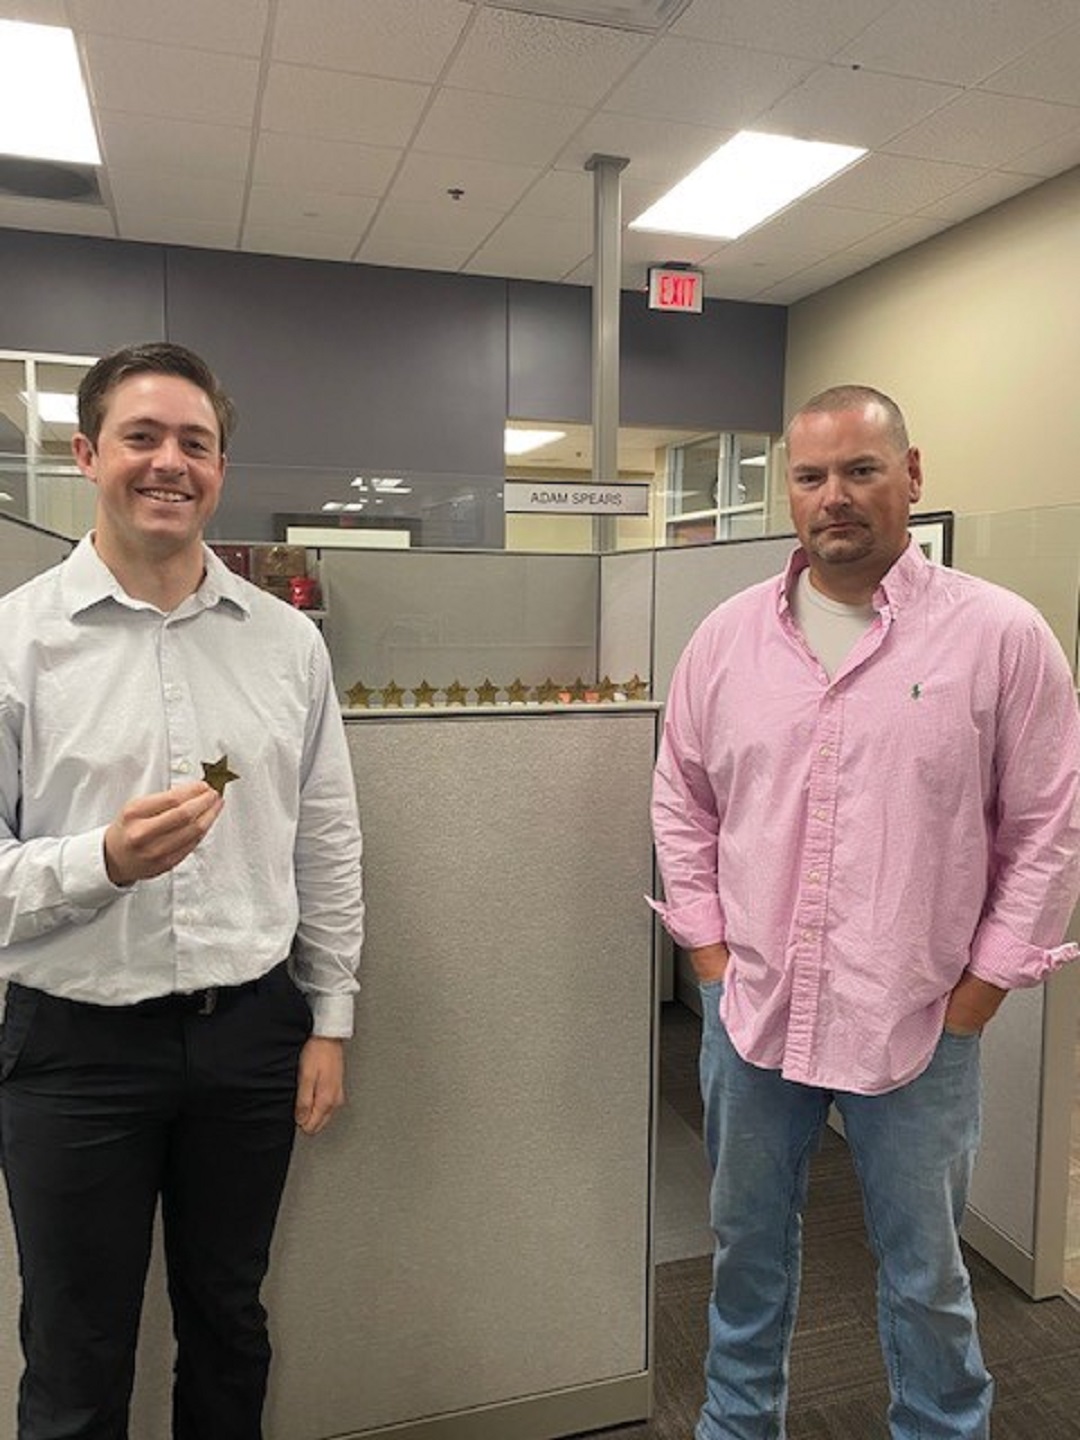 Simpson Strong-Tie Employees Reid Feeley and Adam Spears